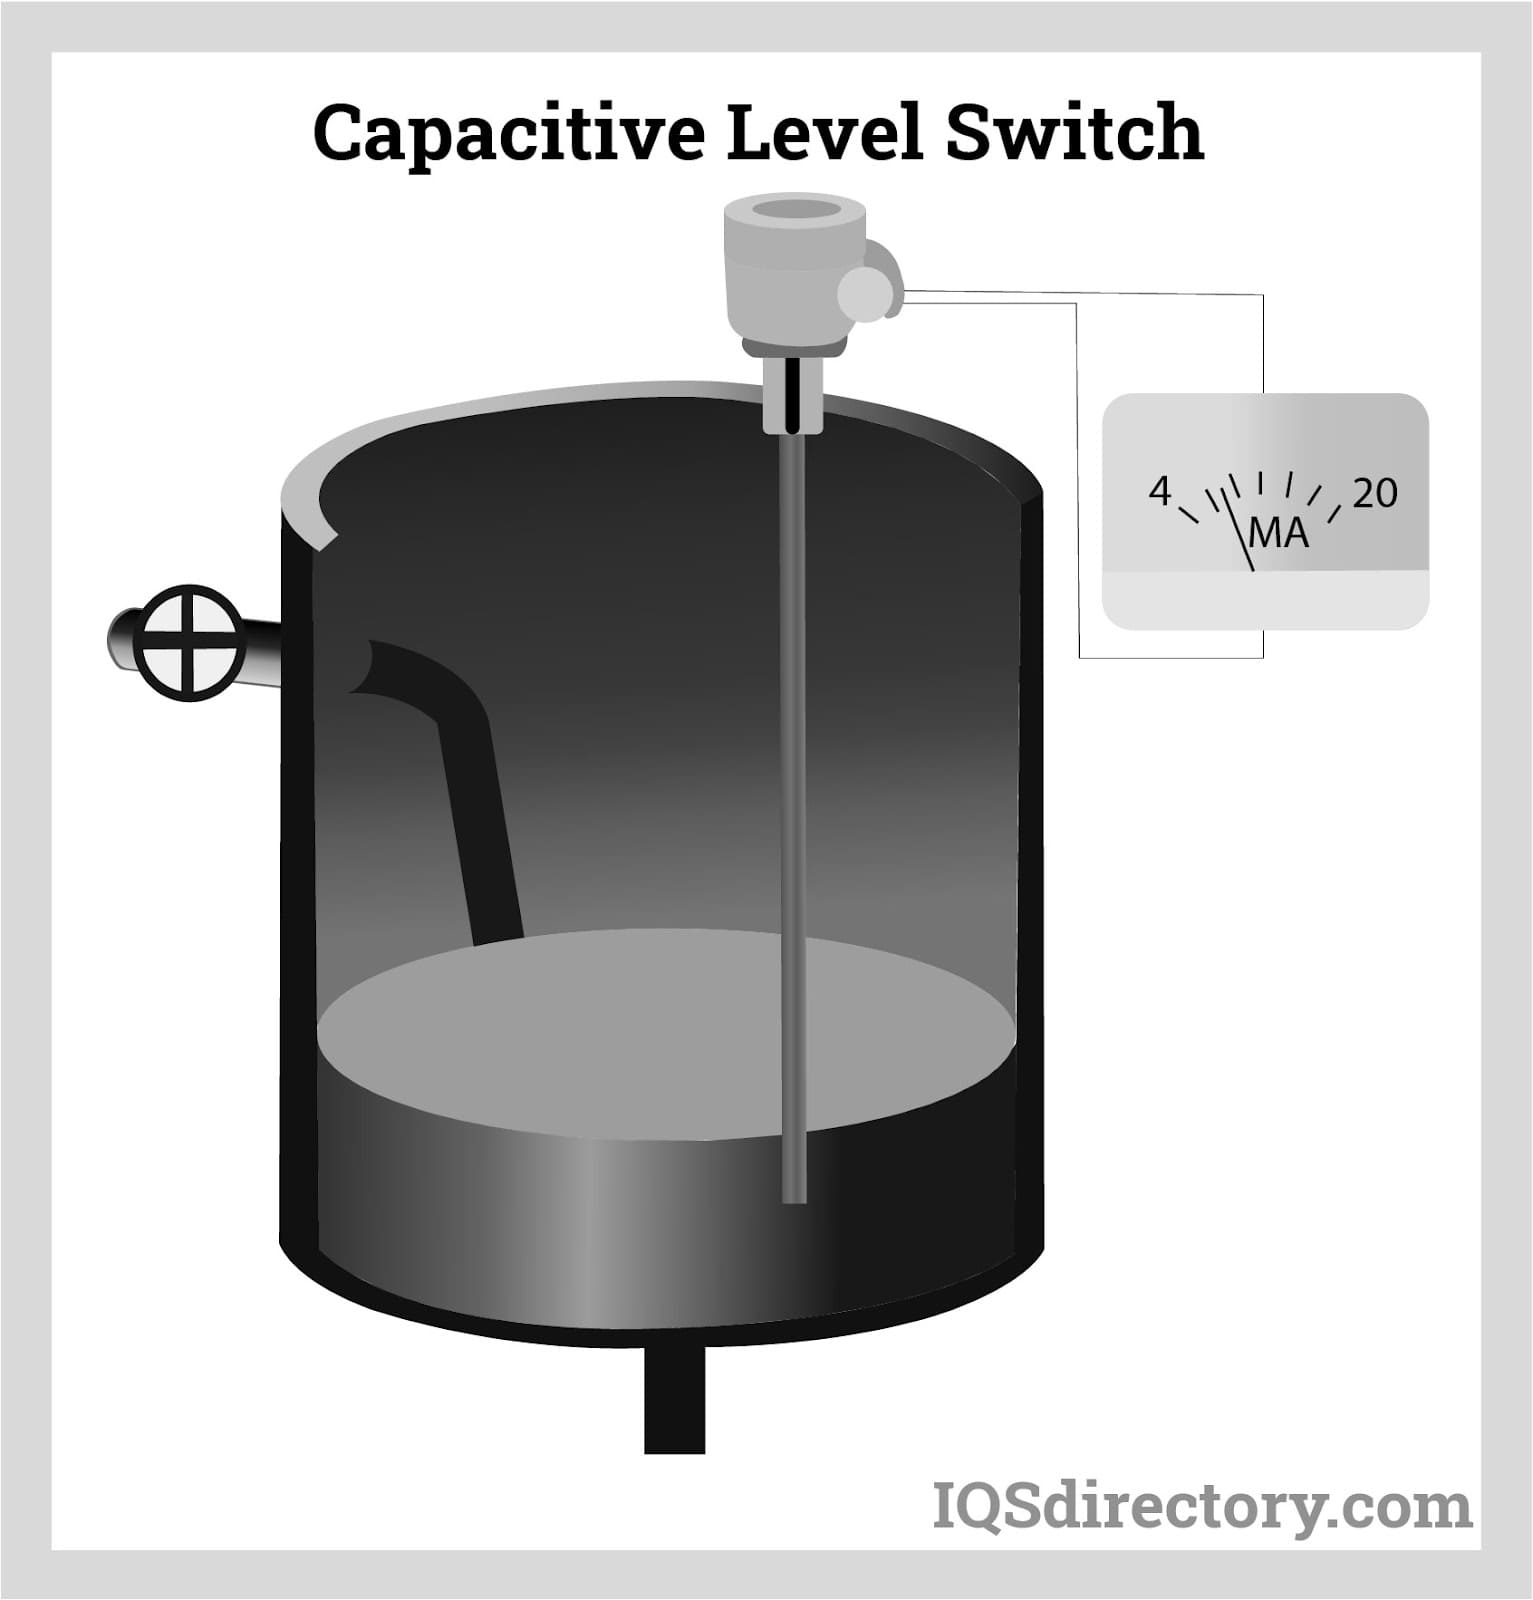 Capacitive Level Switch